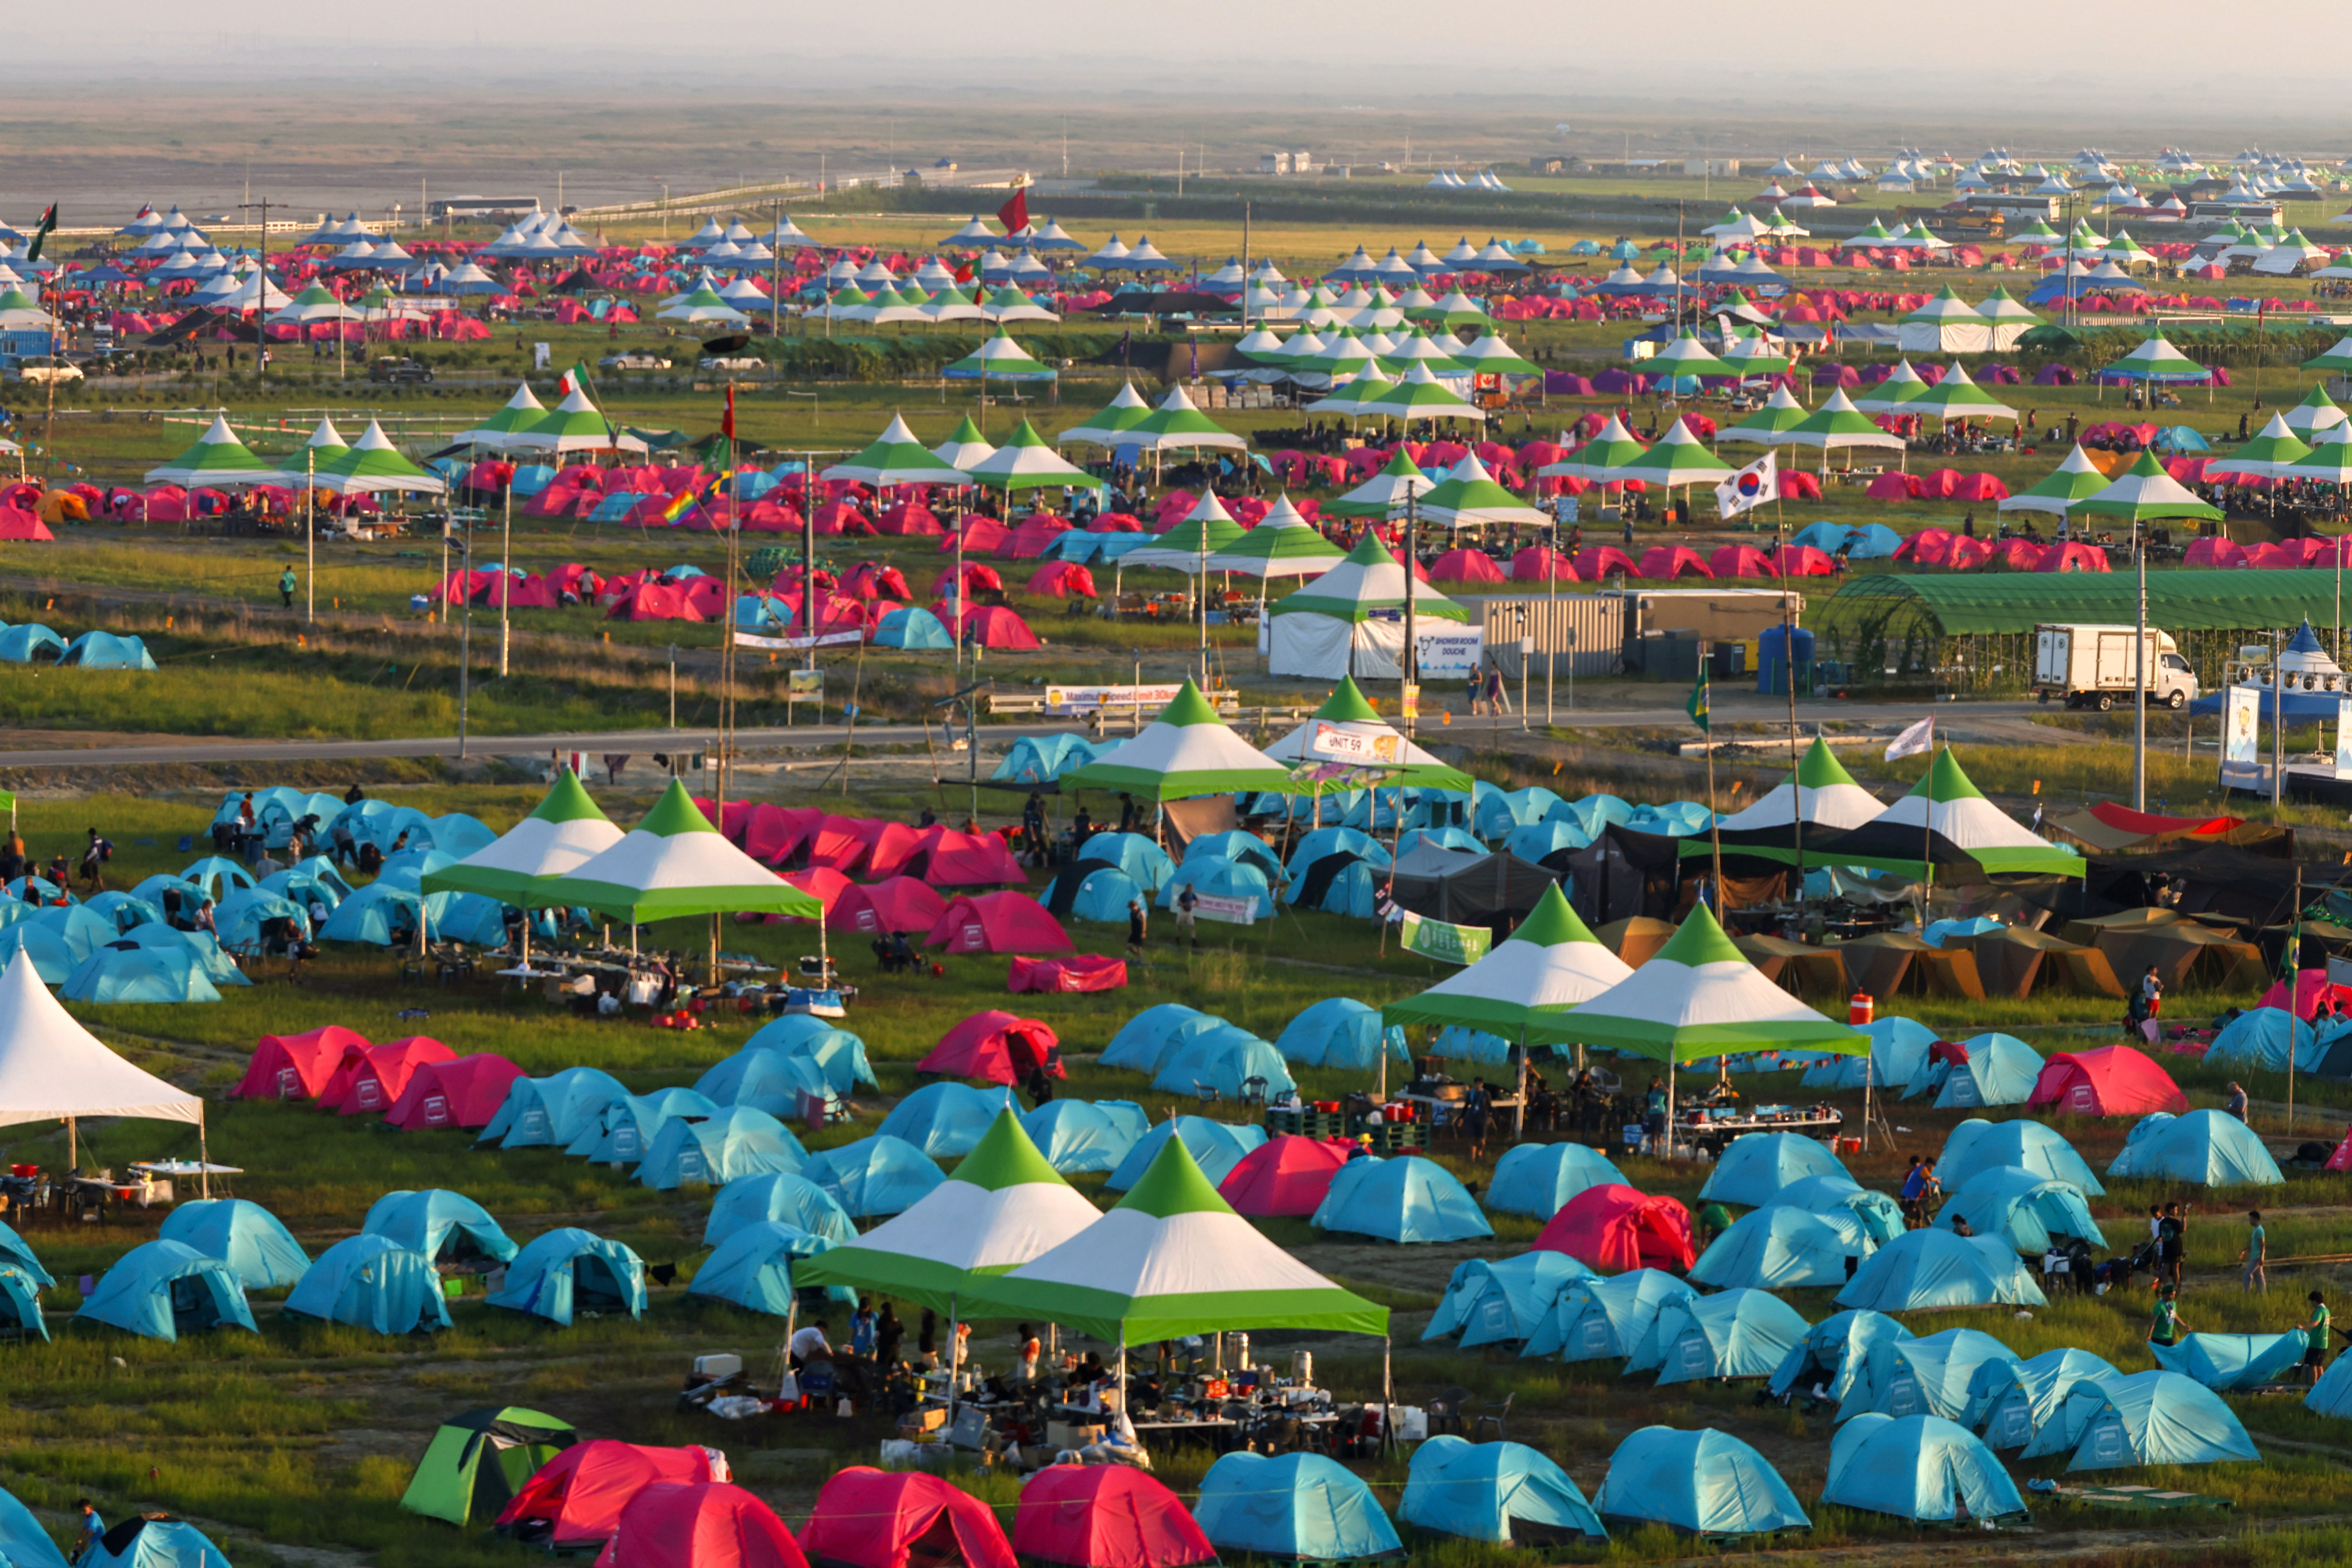 Nearly 40,000 participants have safely departed the campsite and relocated to multiple sites in Seoul, according to organisers. Photo: EPA-EFE